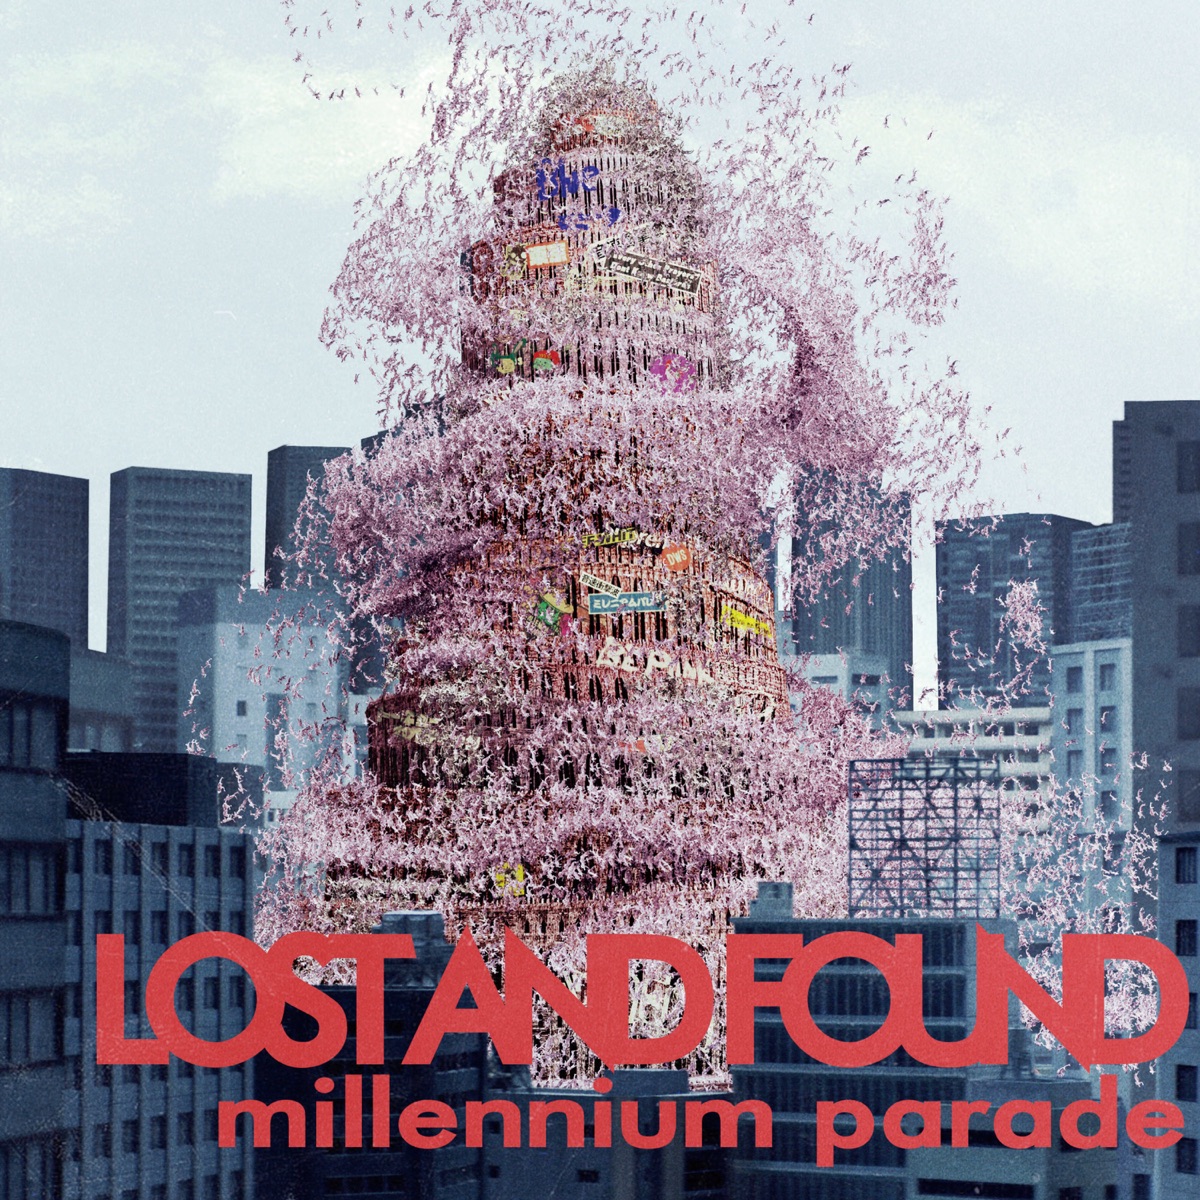 『millennium parade - lost and found』収録の『lost and found』ジャケット